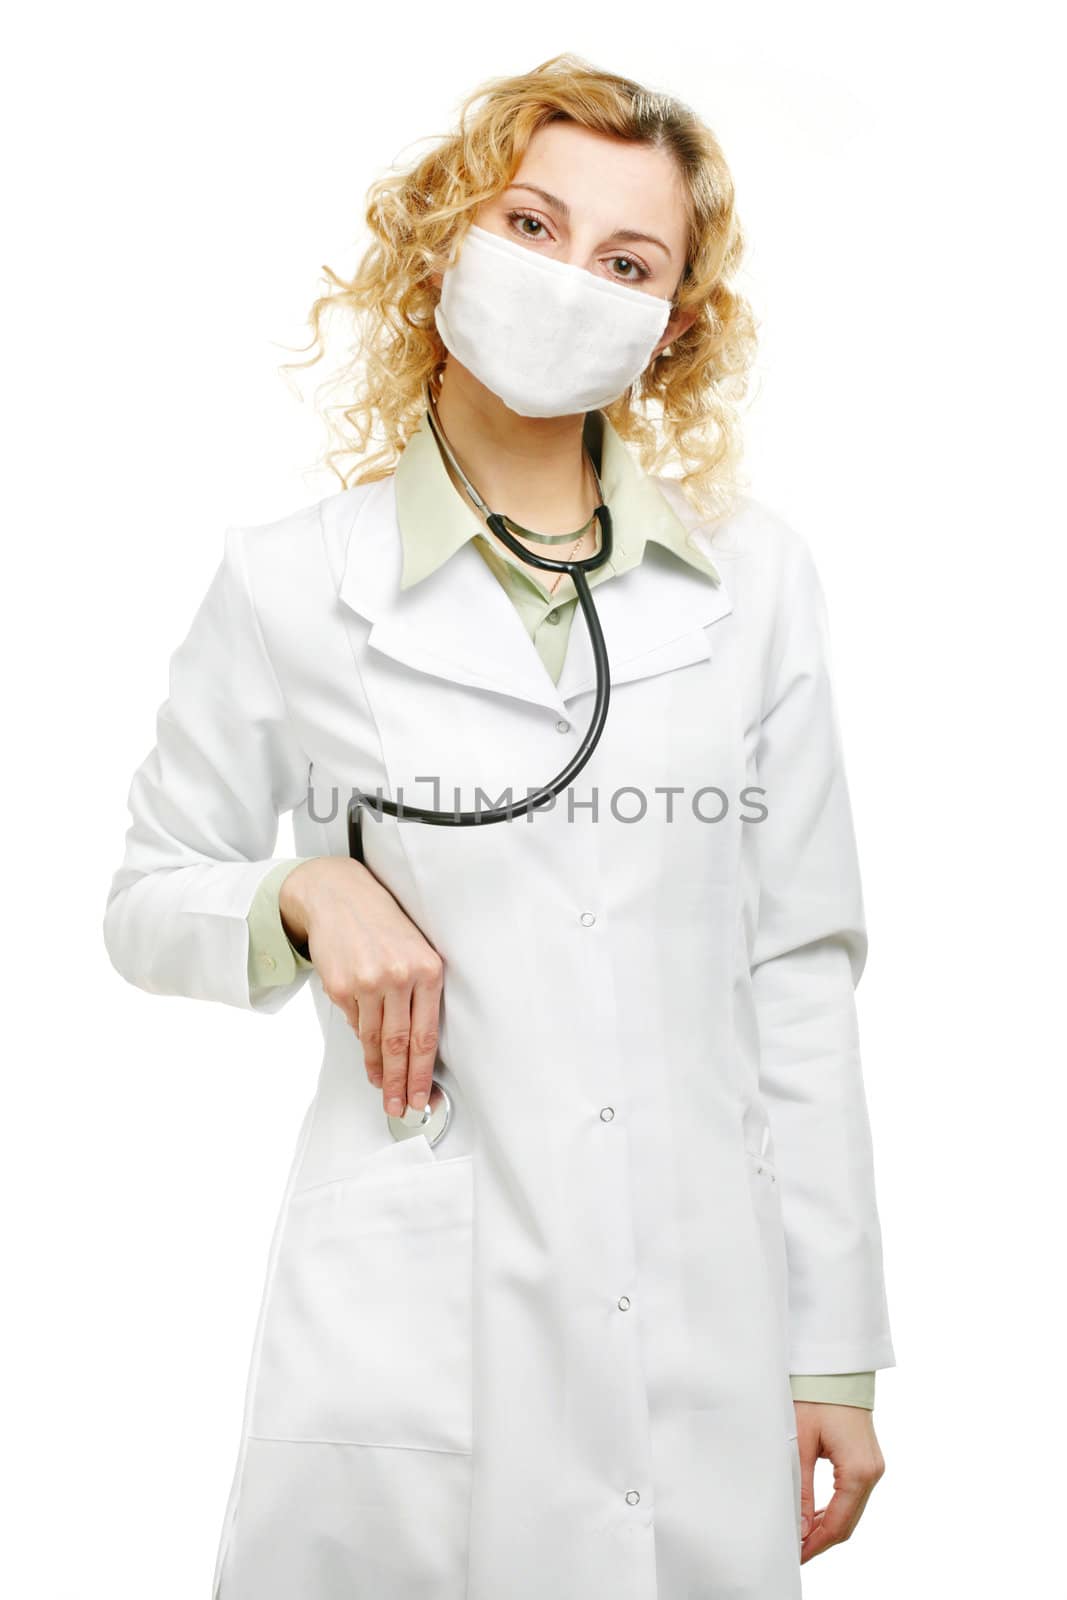 An image of a young doctor working